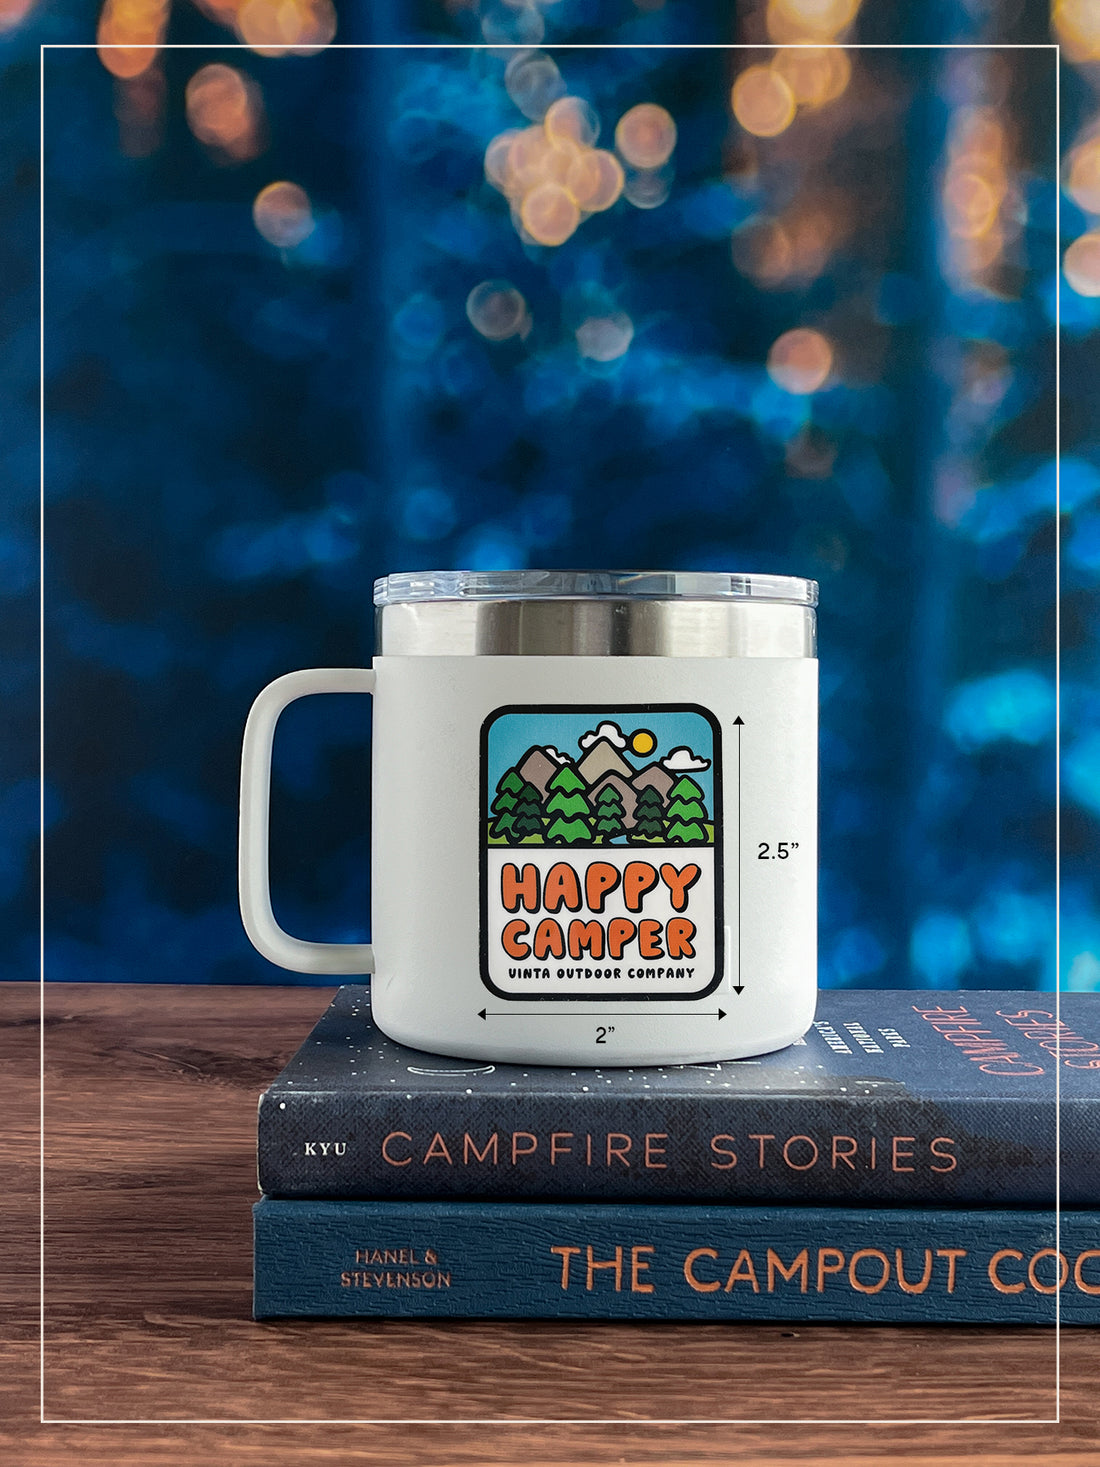 Happy Camper sticker placed on a white mug with trees and lights in the far background.